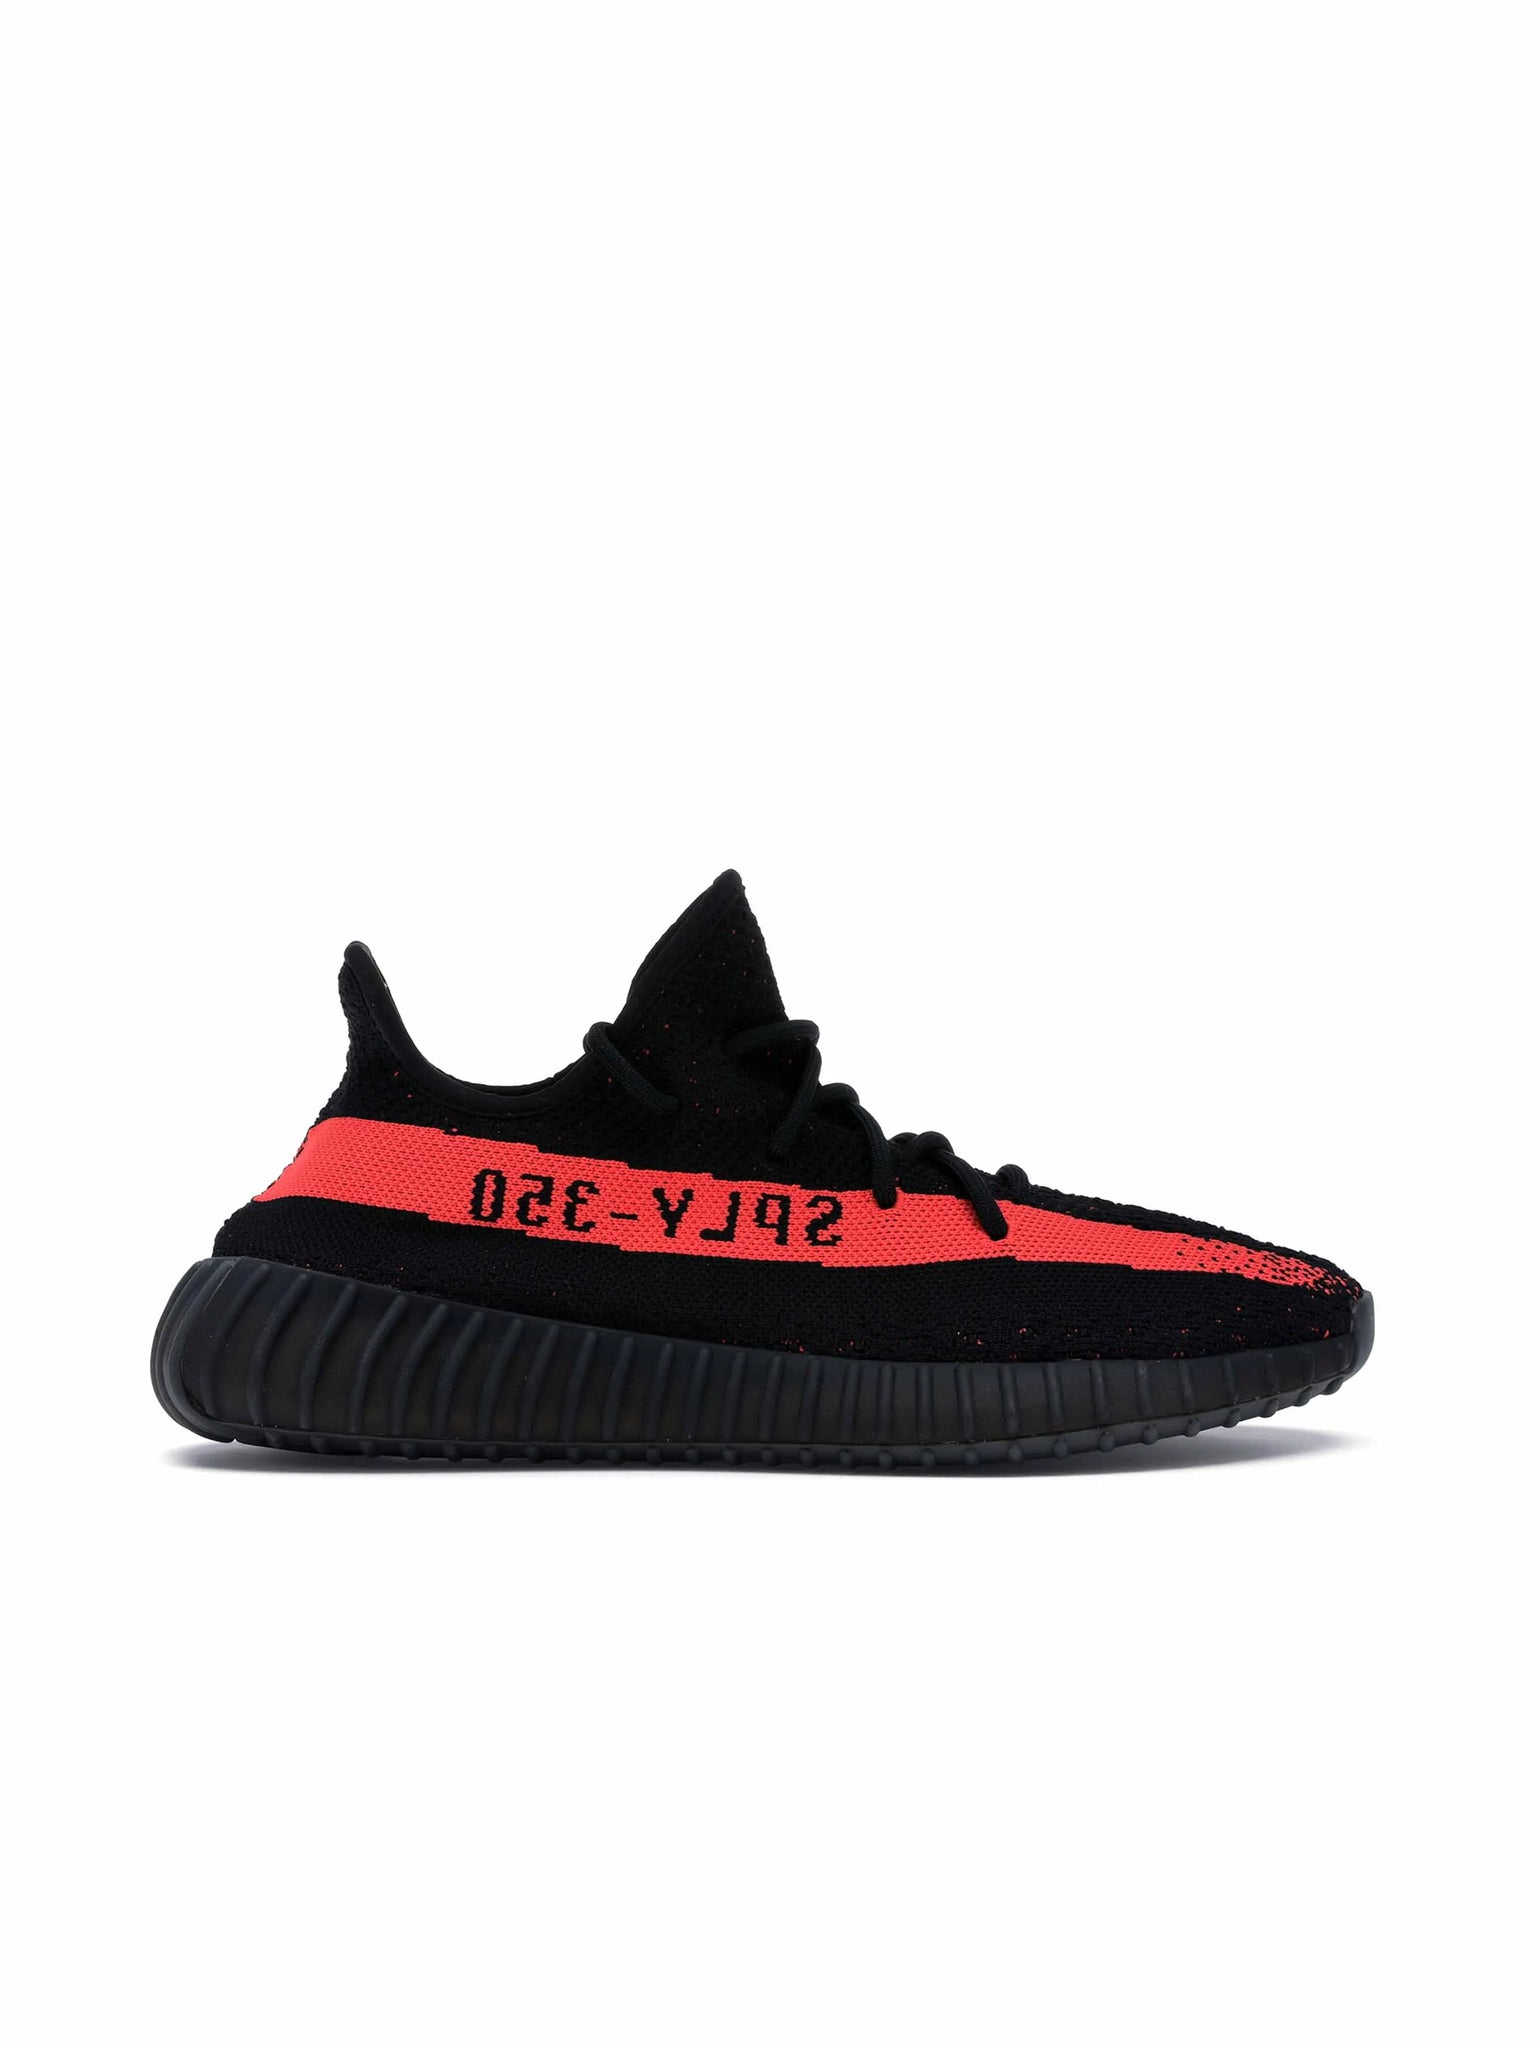 adidas Yeezy Boost 350 V2 Core Black/Red (2022) Prior